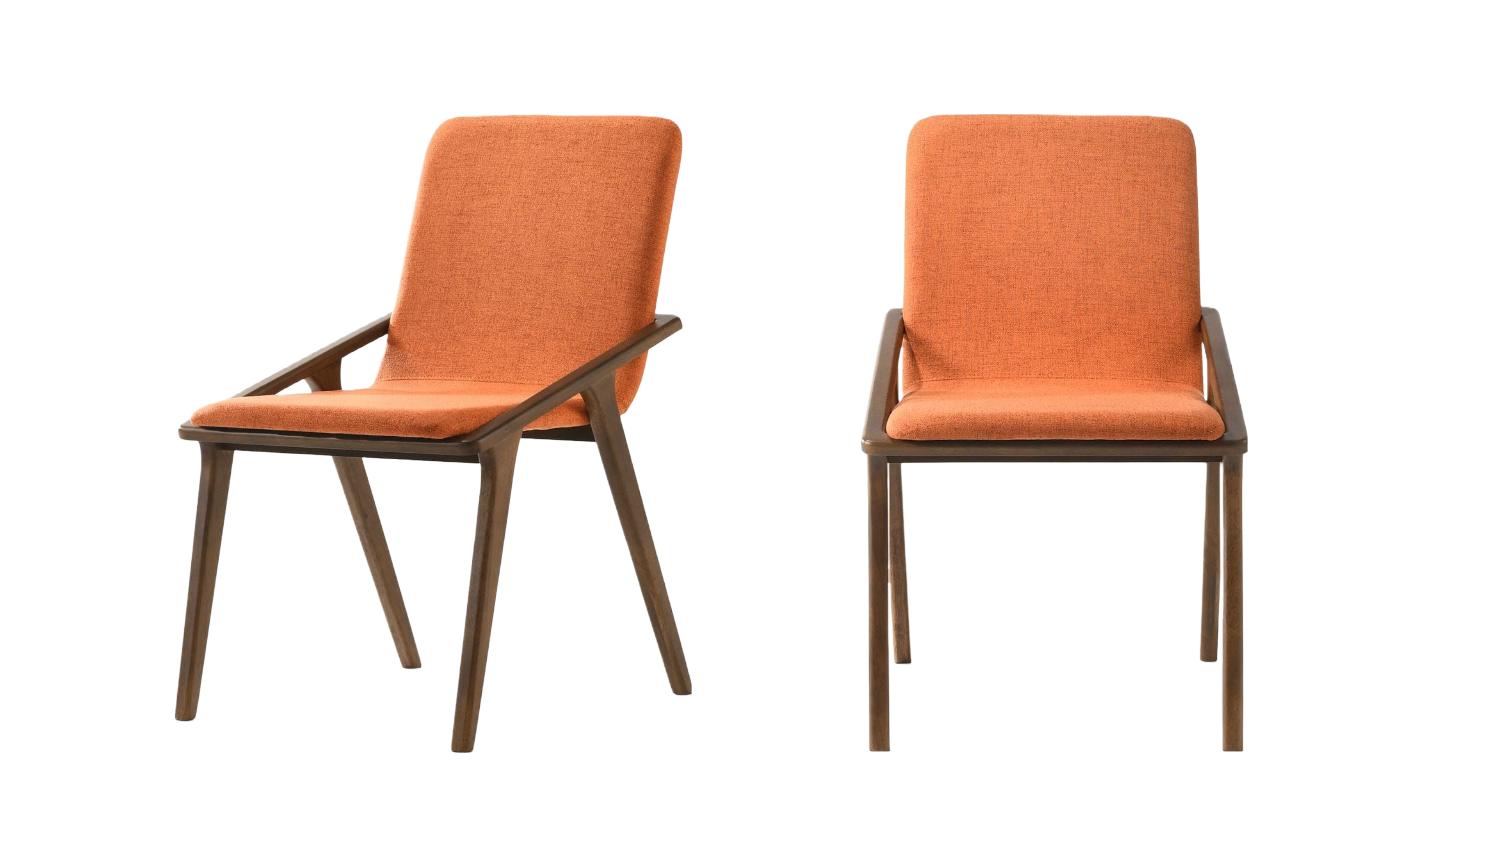 Contemporary, Modern Dining Chair Set Zeppelin VGMAMI-510-ORG-2pcs in Orange Fabric